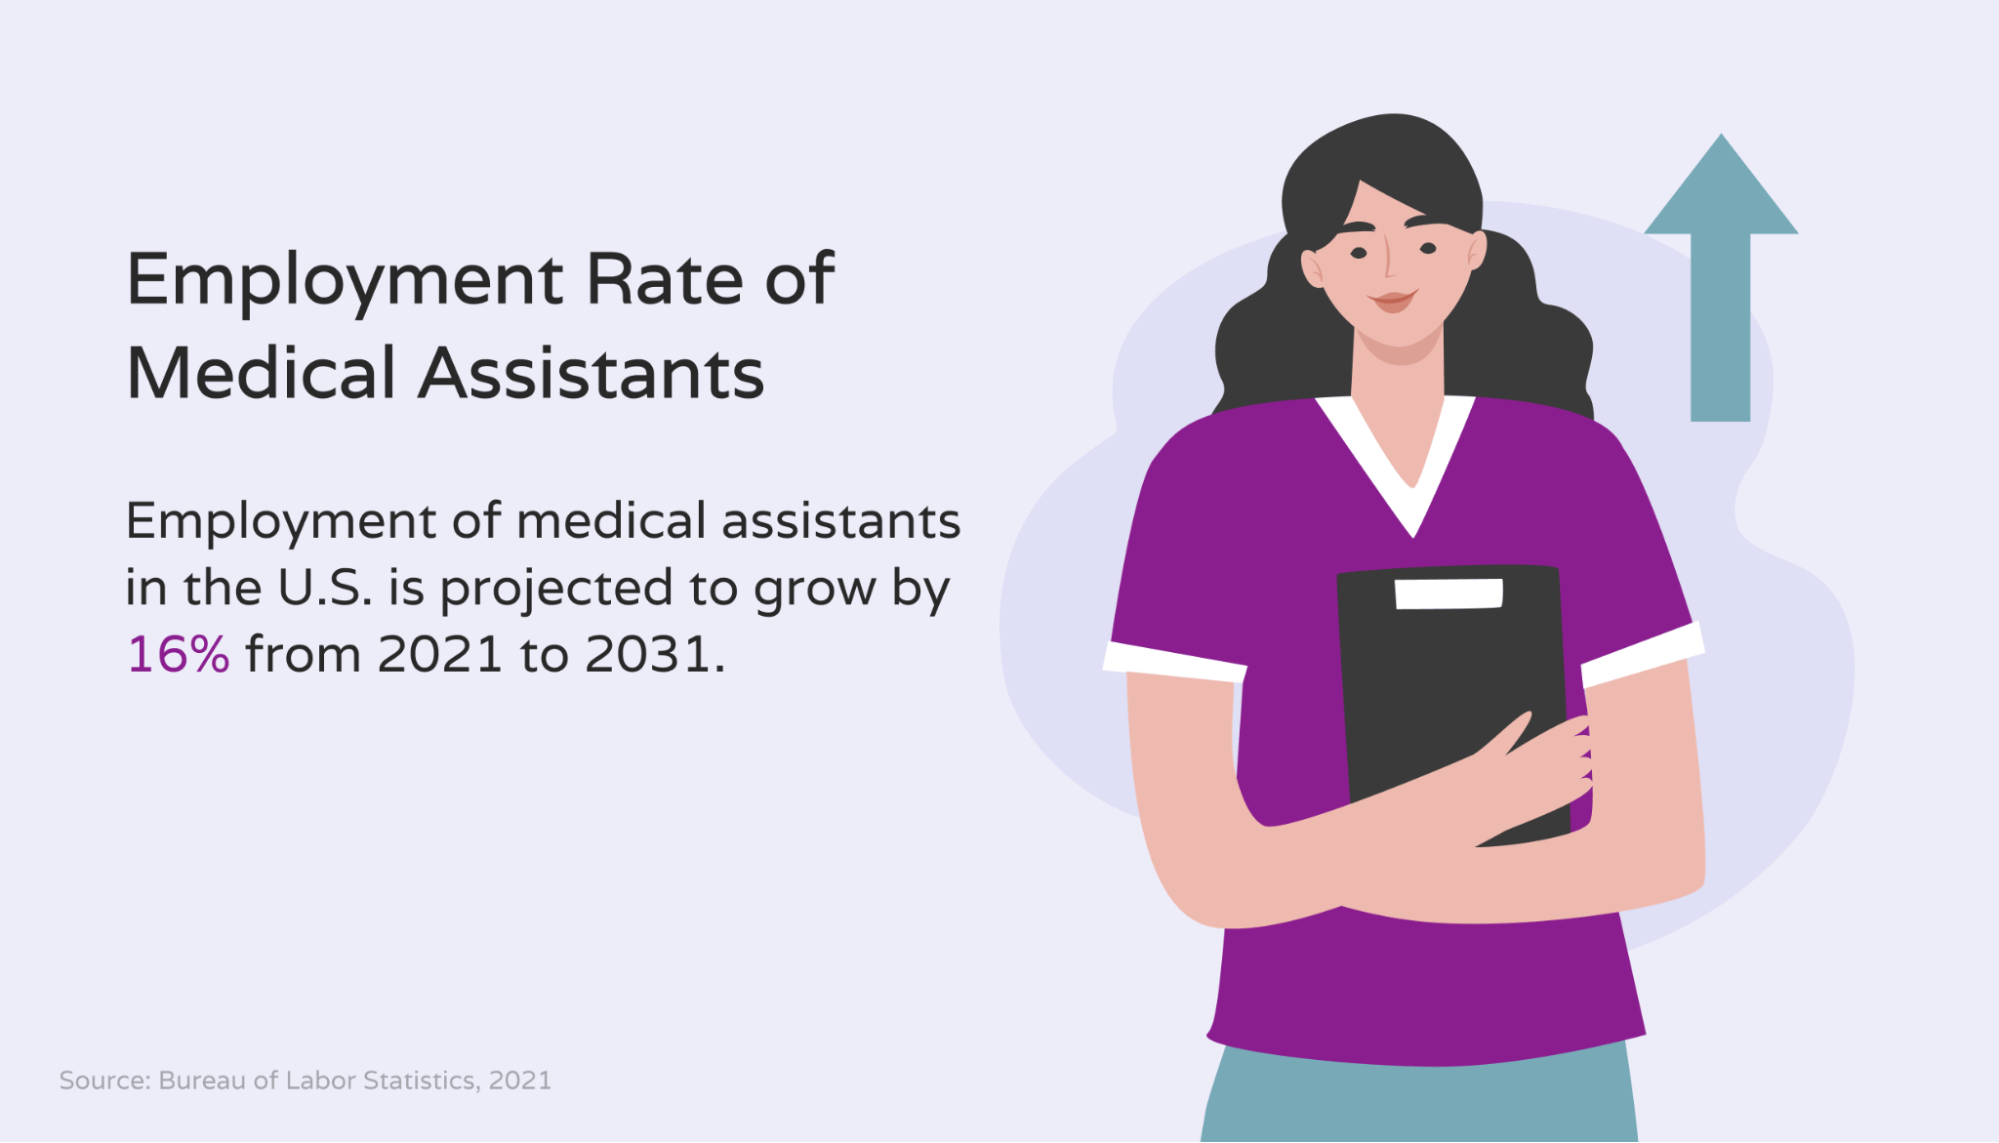 Increase in the employment rate of medical assistants from 2021 to 2031